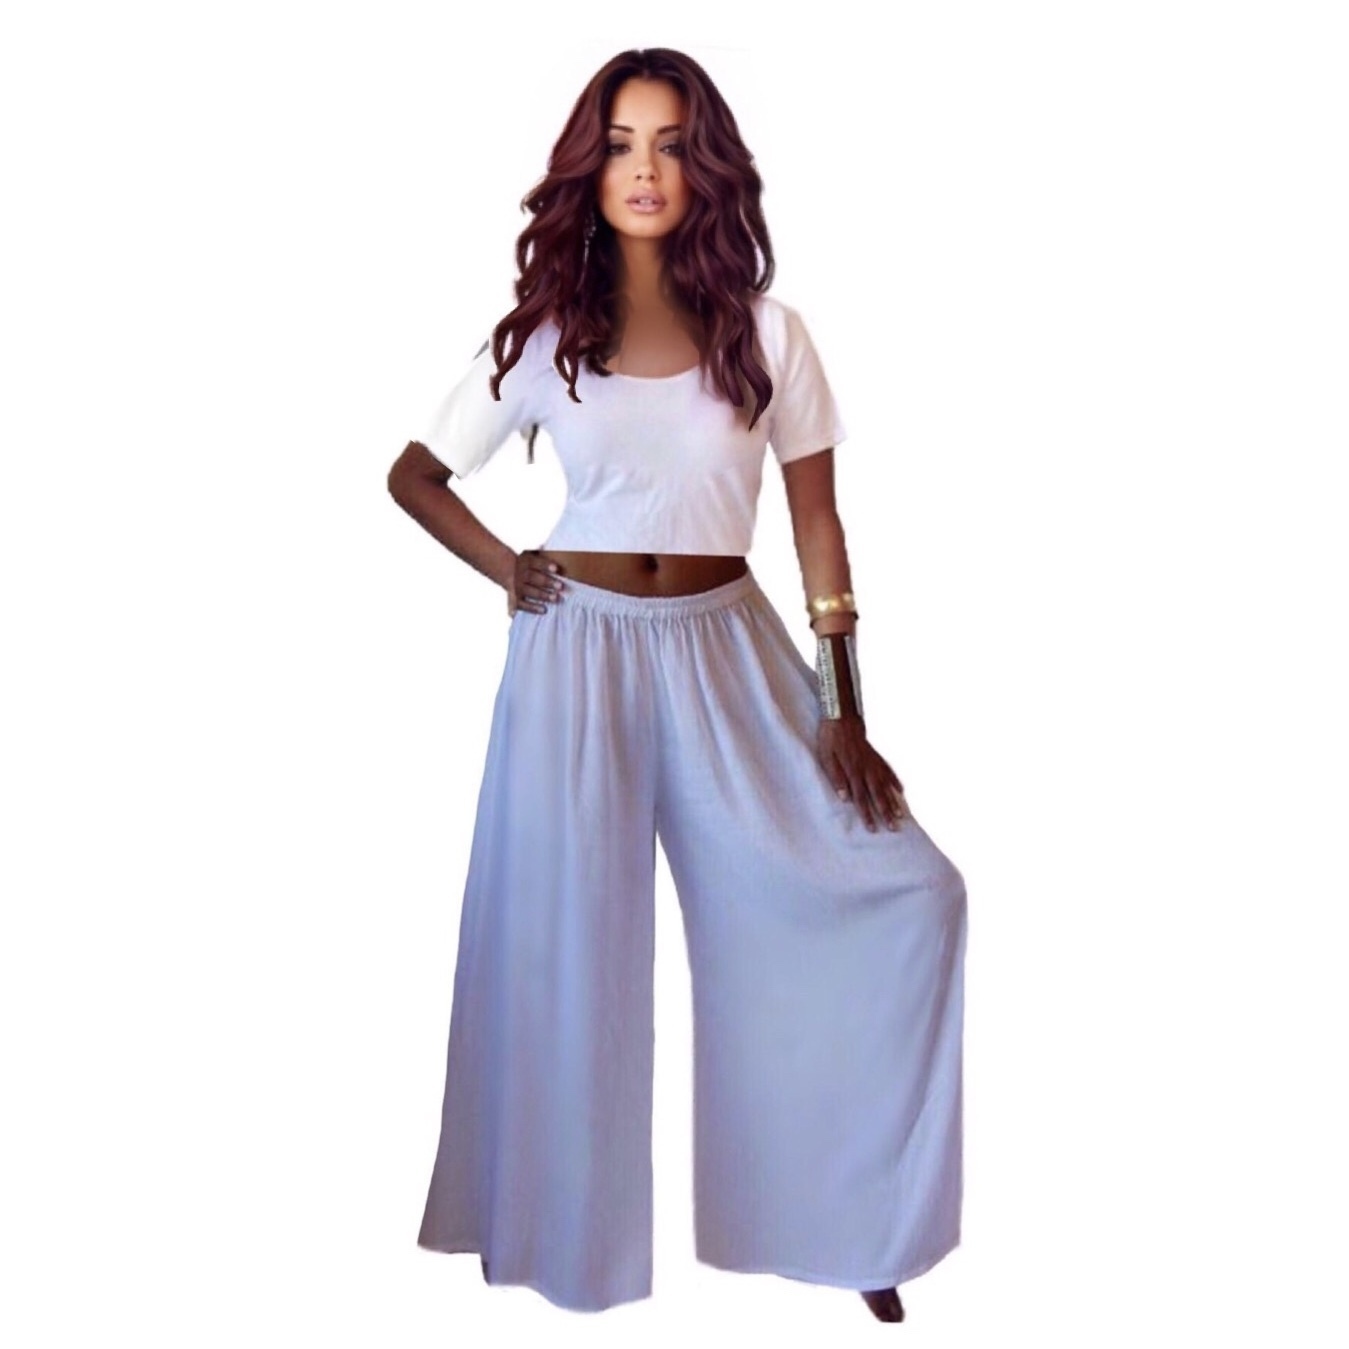 Yoga and Dance Clothing, Palazzo Capri Flow Pants, Wide Leg Gaucho Trousers,  Pixie Festival Clothes, Skirtbelt, Pointy, Boho 3/4 Length Crop -   Canada